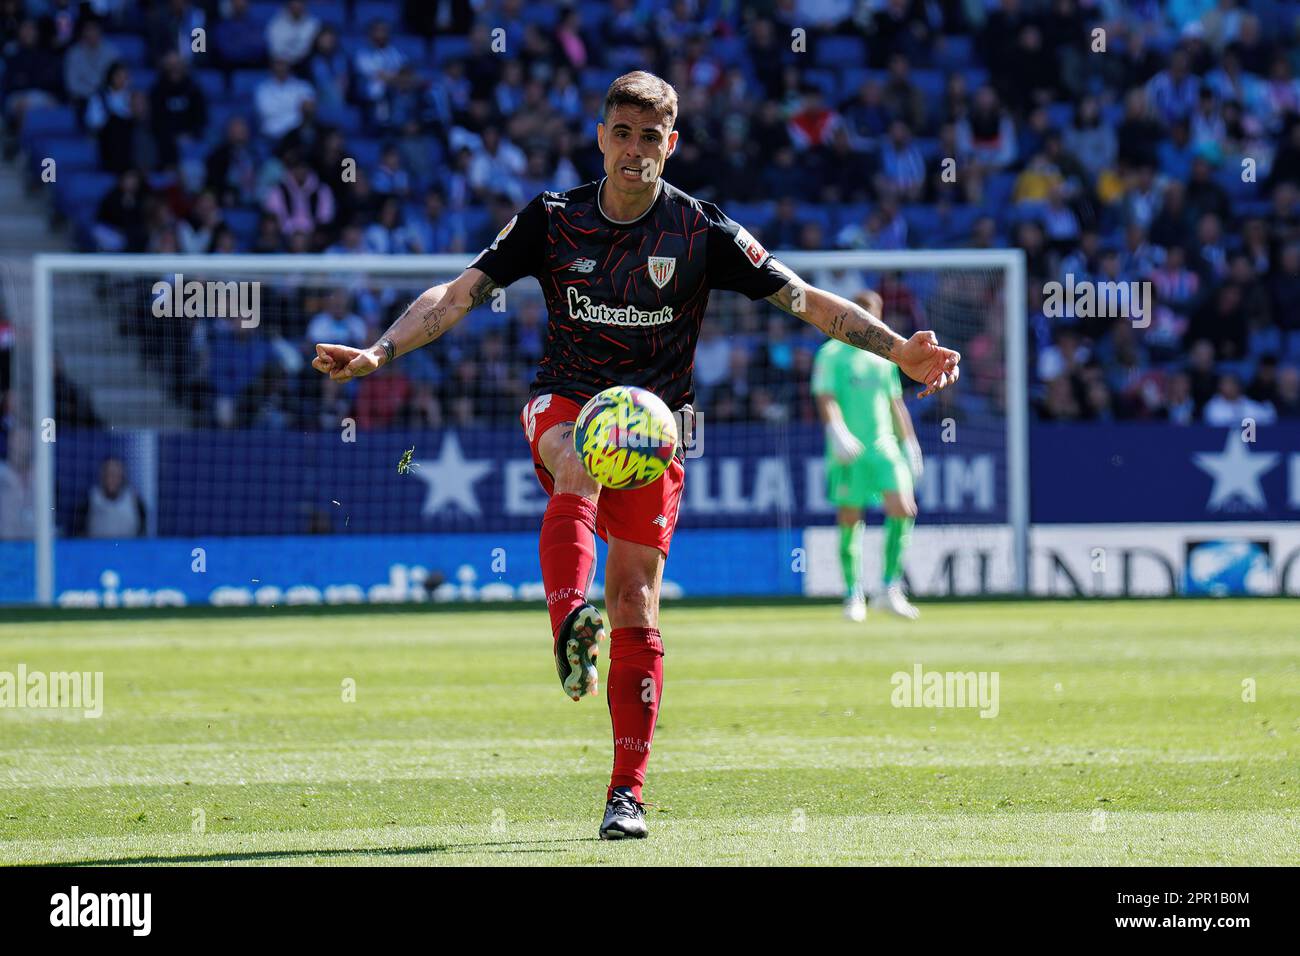 BARCELONA - APR 8: Dani Garcia in action at the LaLiga match between RCD Espanyol and Athletic Club de Bilbao at the RCDE Stadium on April 8, 2023 in Stock Photo